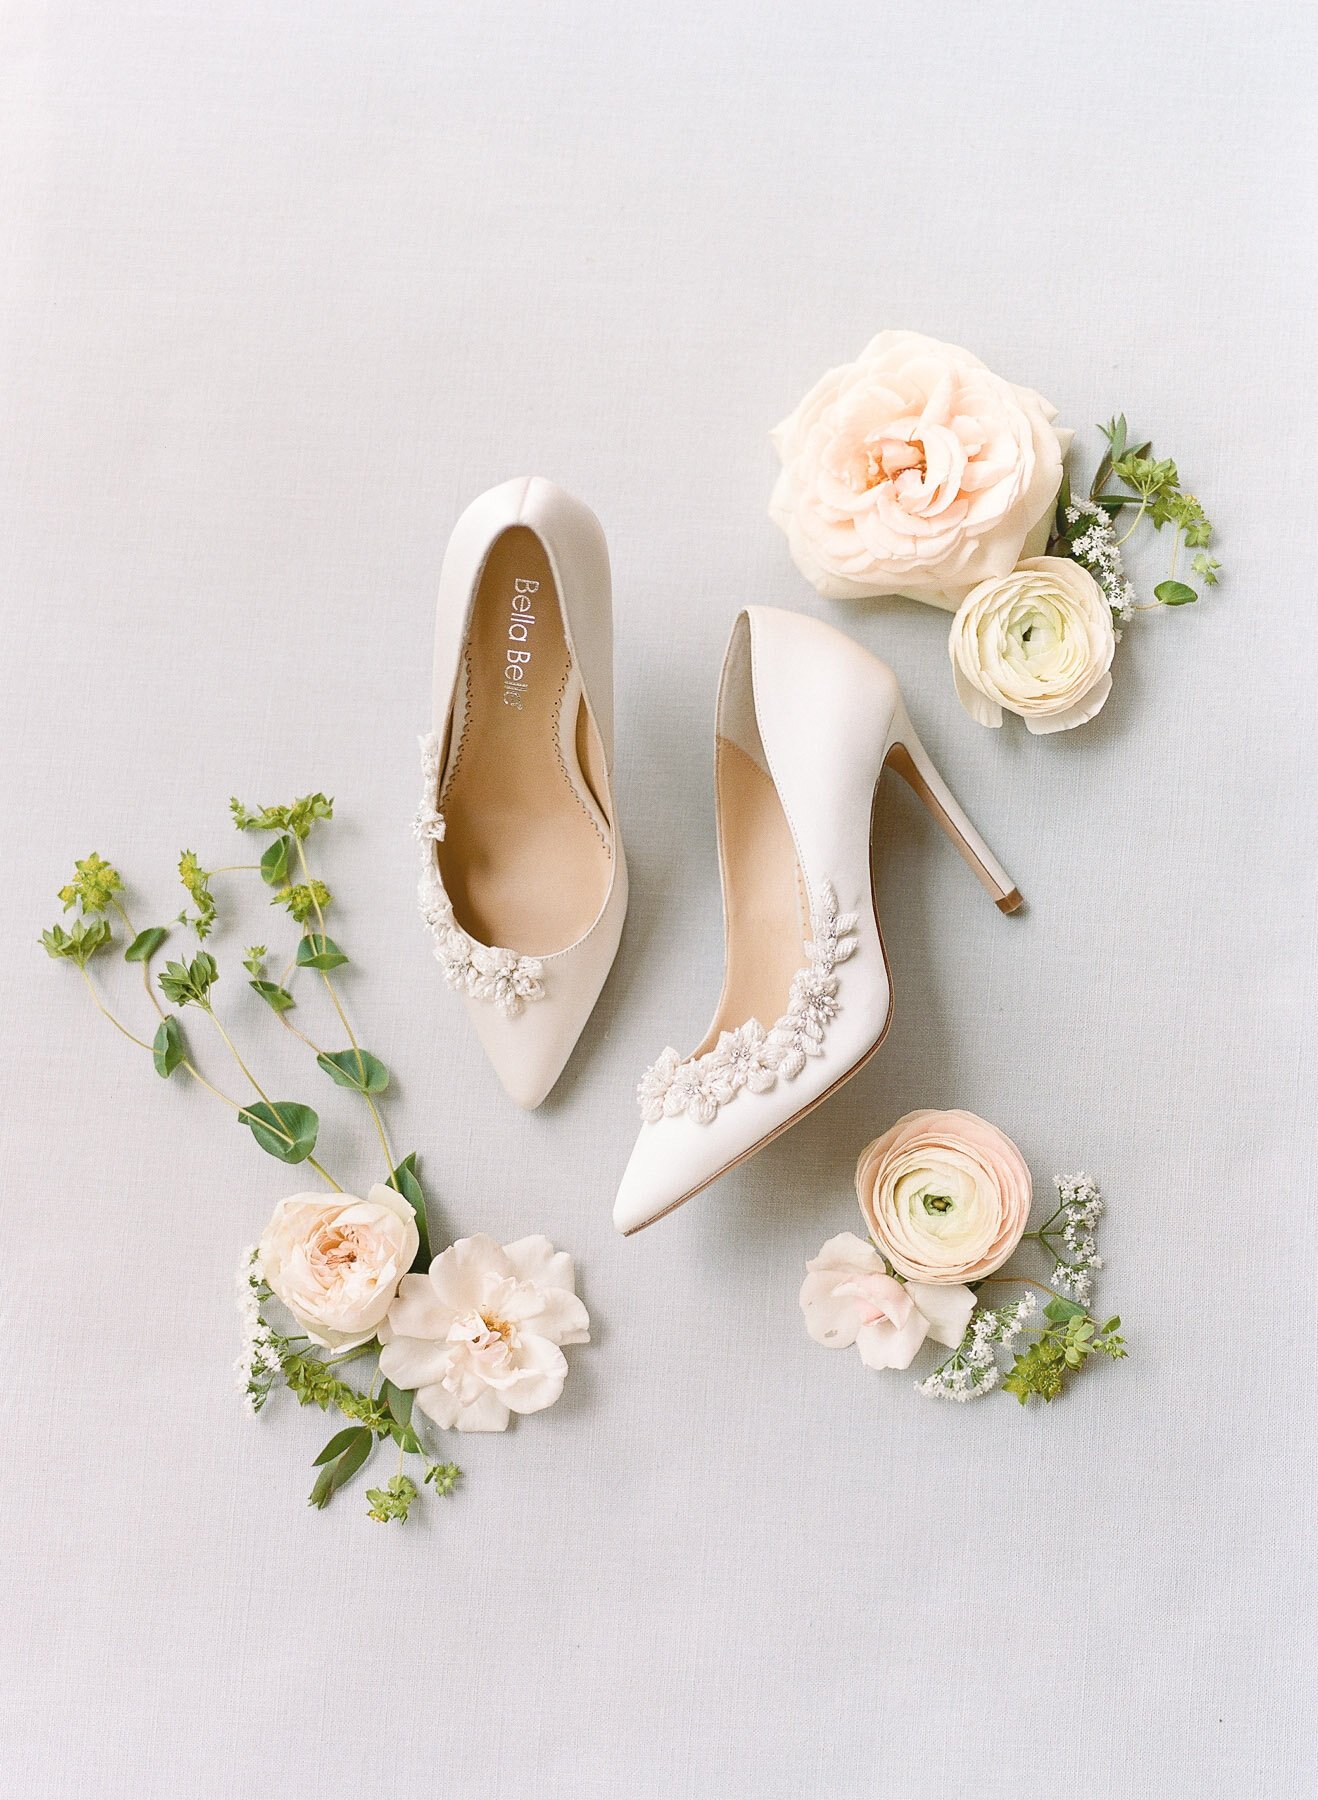 Bella Belle Shoes by Kelly Strong Events